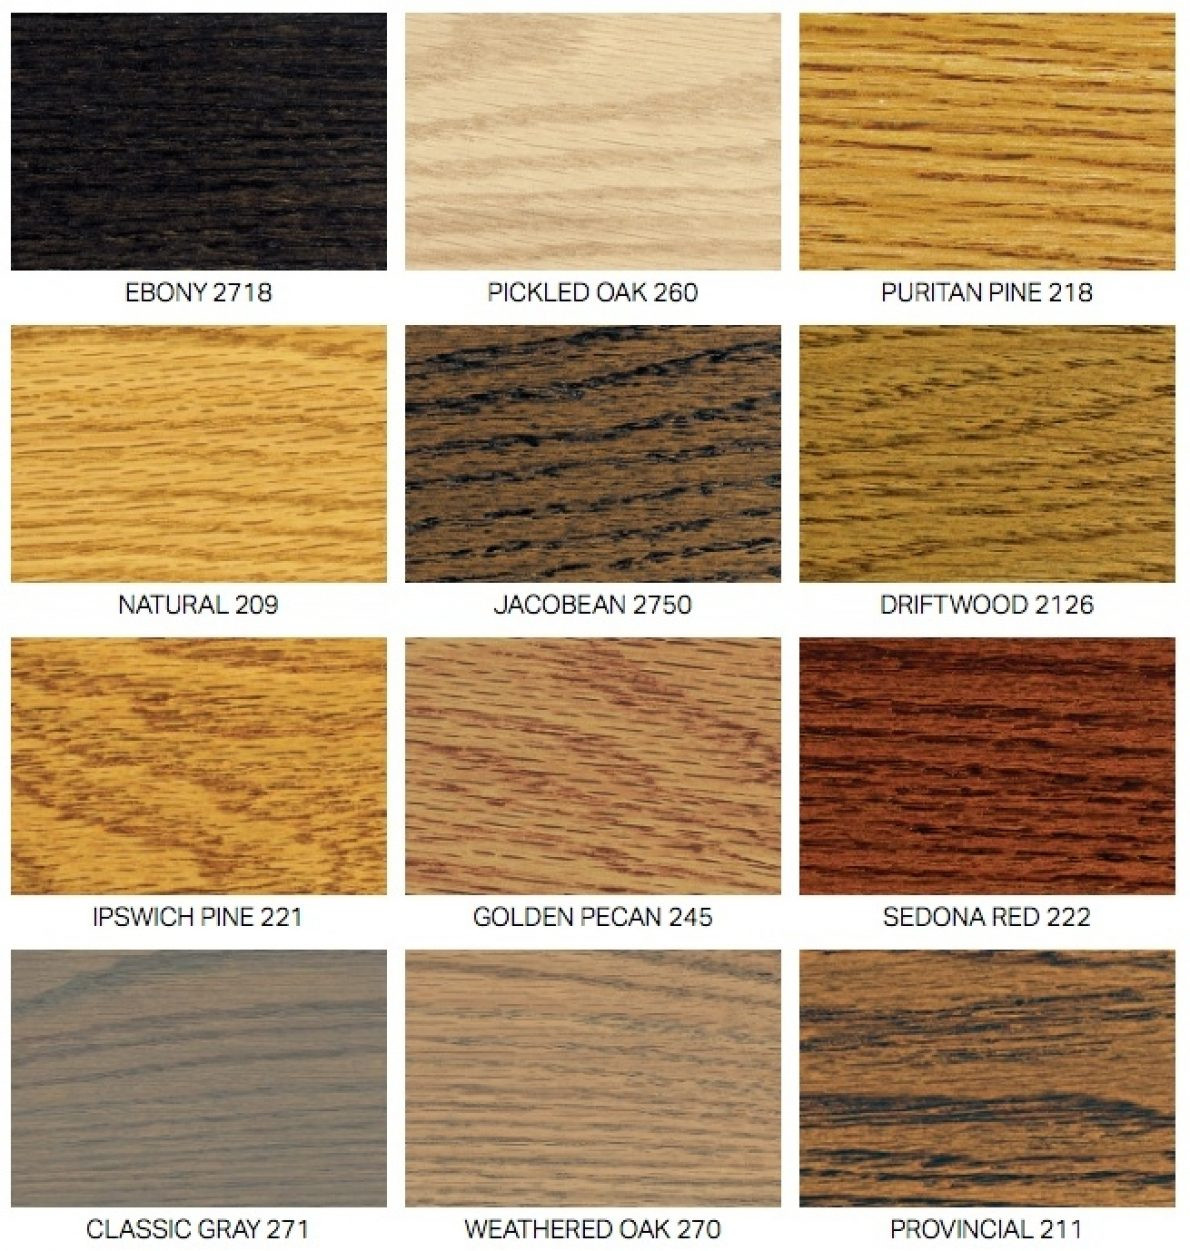 23 Fantastic Hardwood Floor Stain Colors Espresso 2024 free download hardwood floor stain colors espresso of 45 minwax stain colors on oak perfect cyberconsul info intended for minwax stain colors on oak 2 oilstains 2 t capture oilstains 1 color large